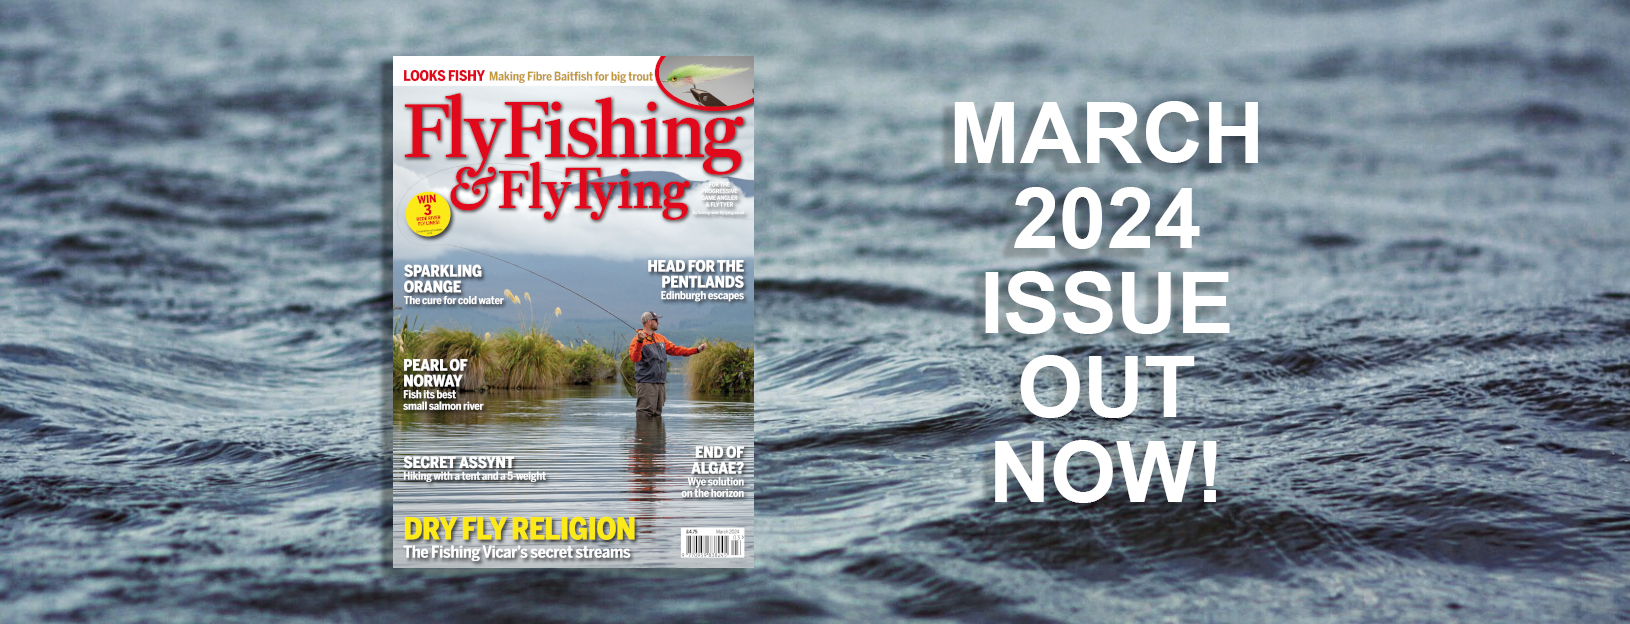 MARCH 2024 ISSUE OF fly fishing and fly tying